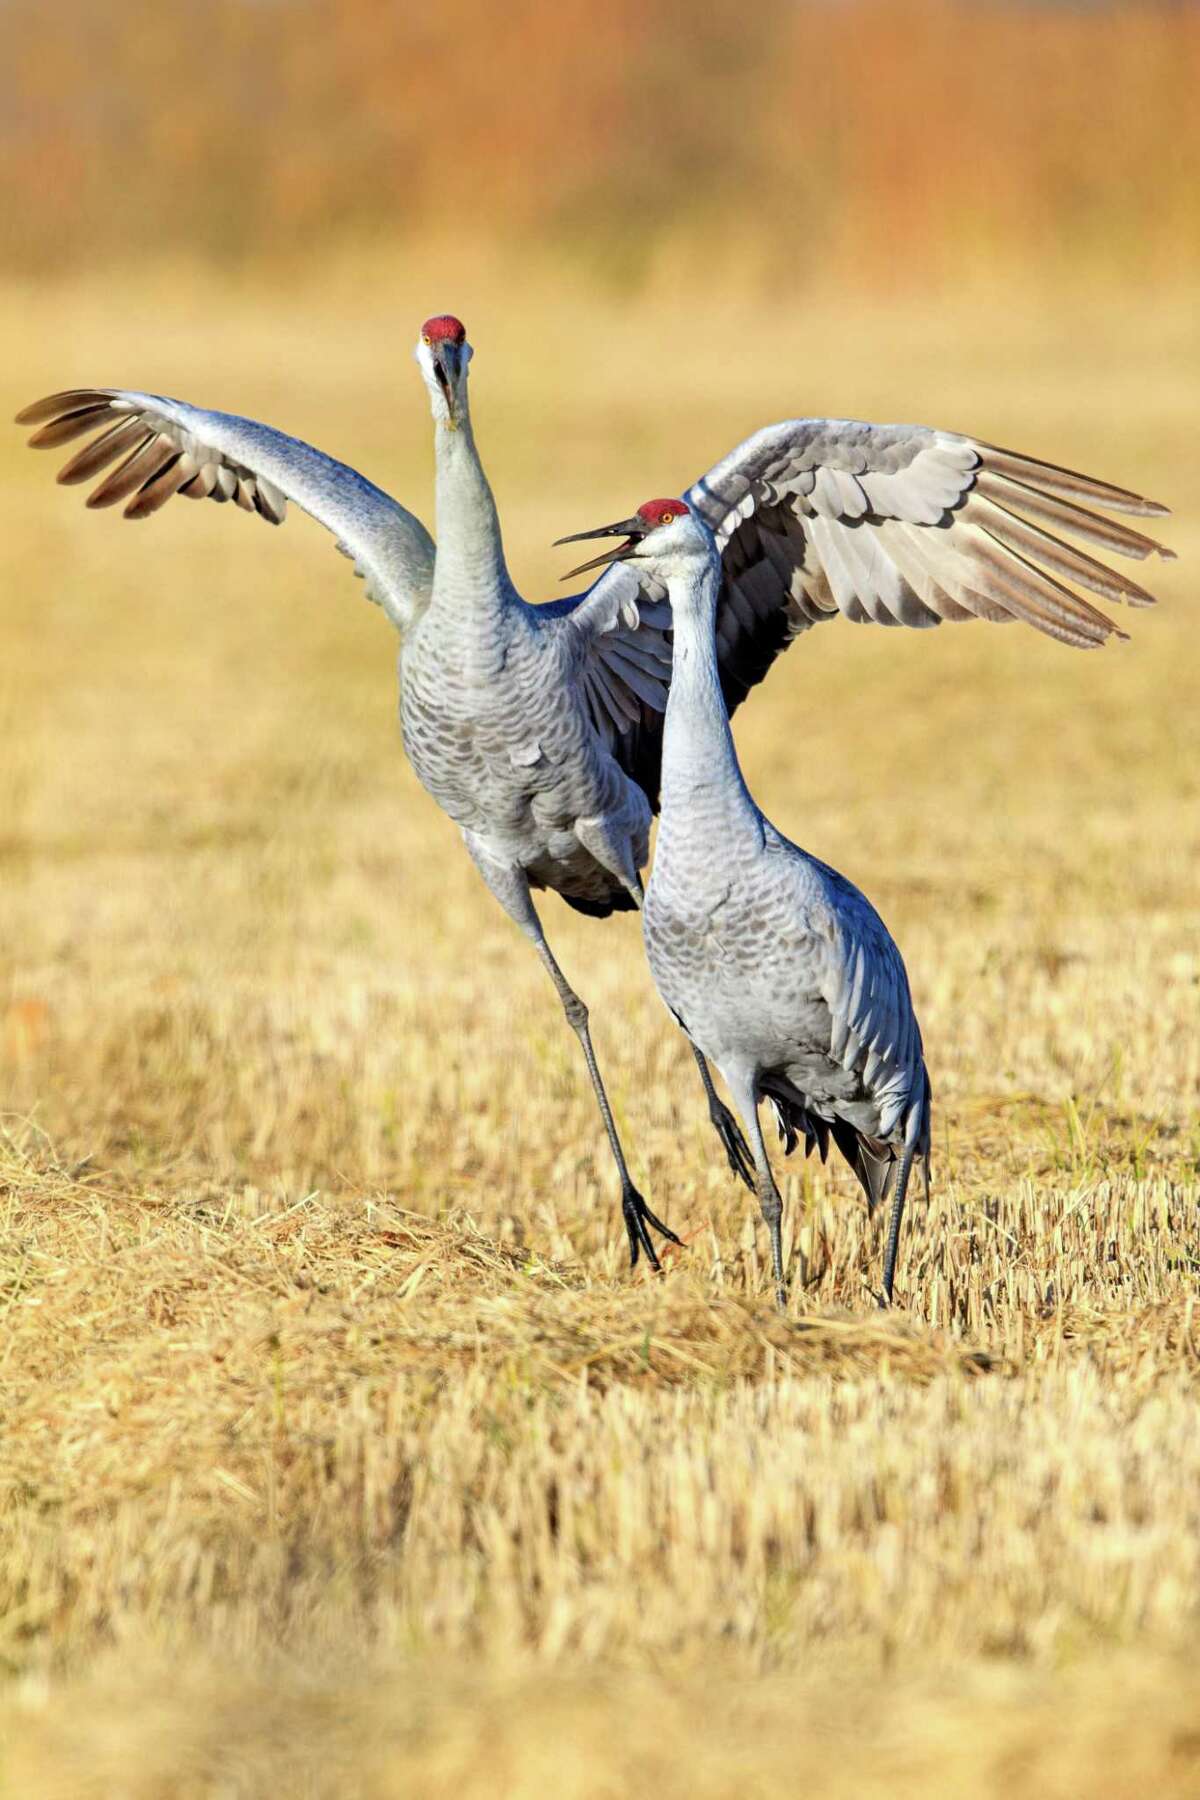 The cranes hunt in small family groups during the day.